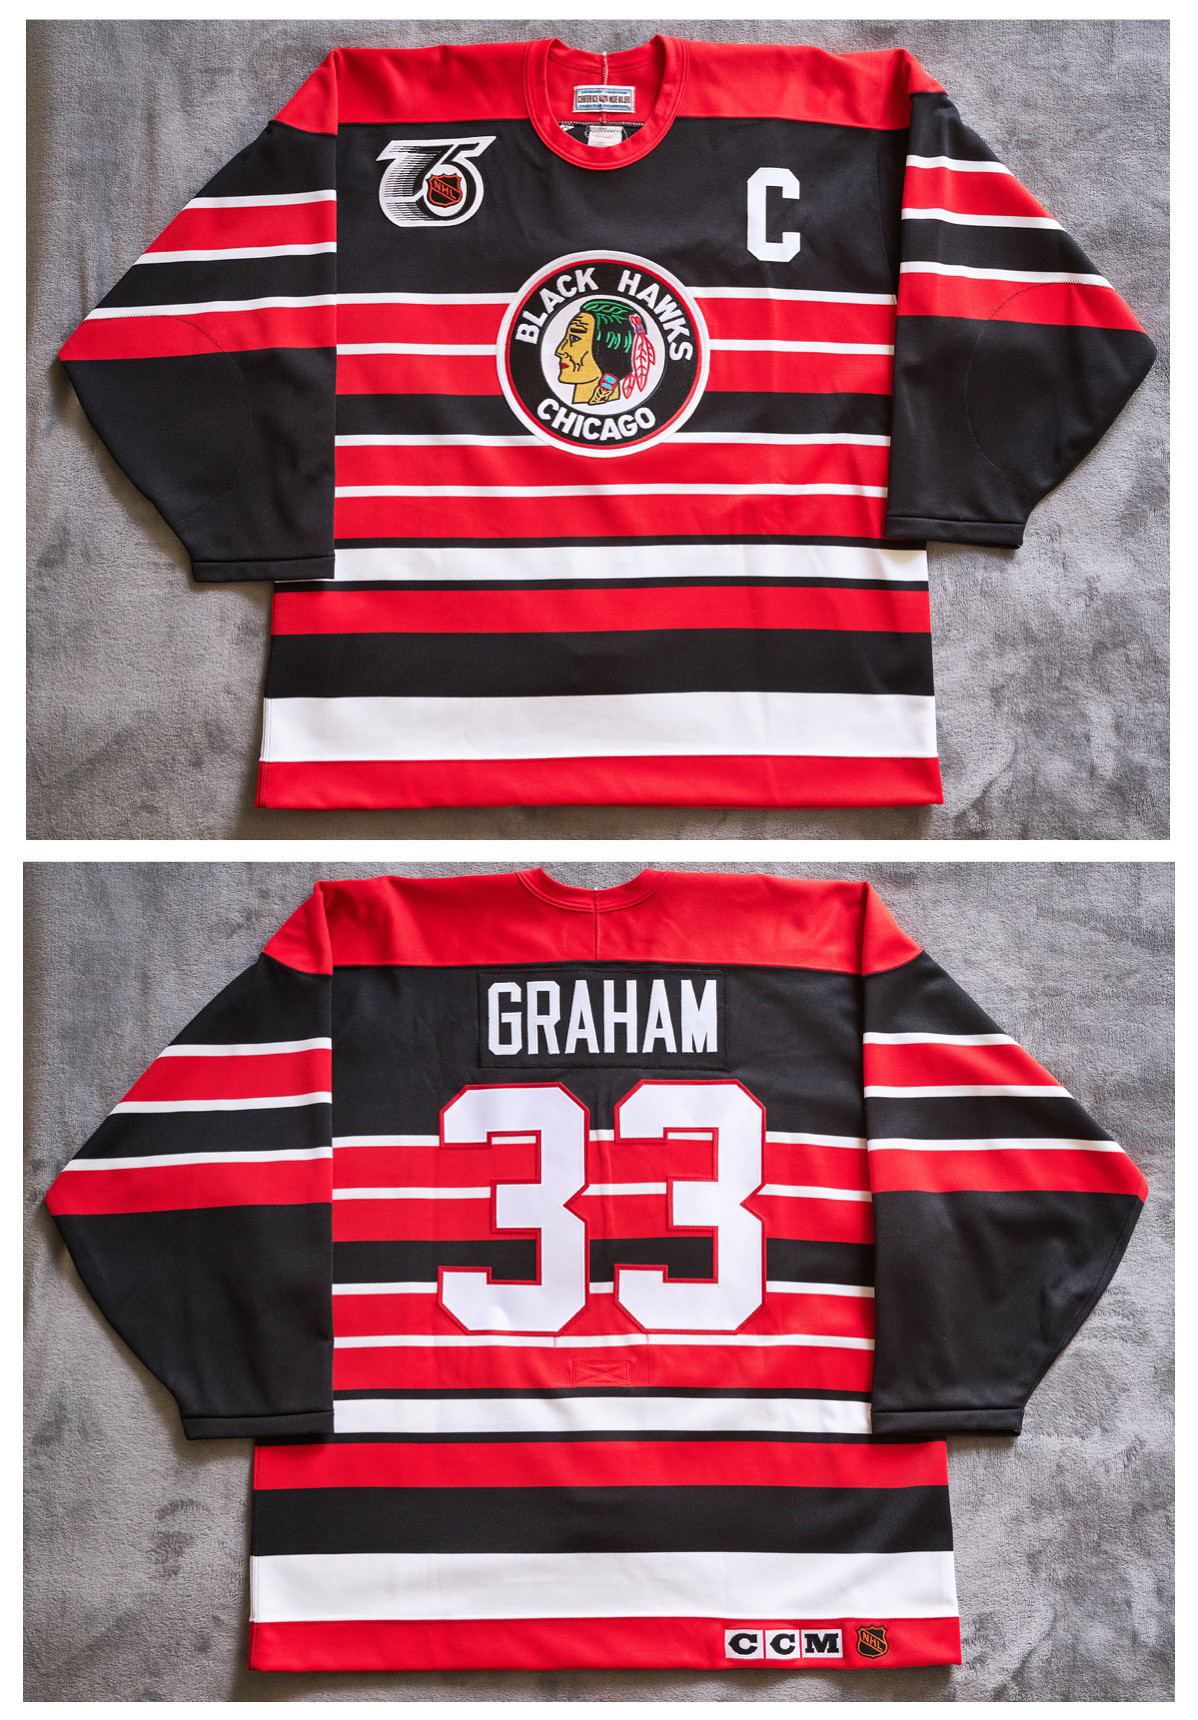 At-Home (United Center) Jersey Question : r/hawks